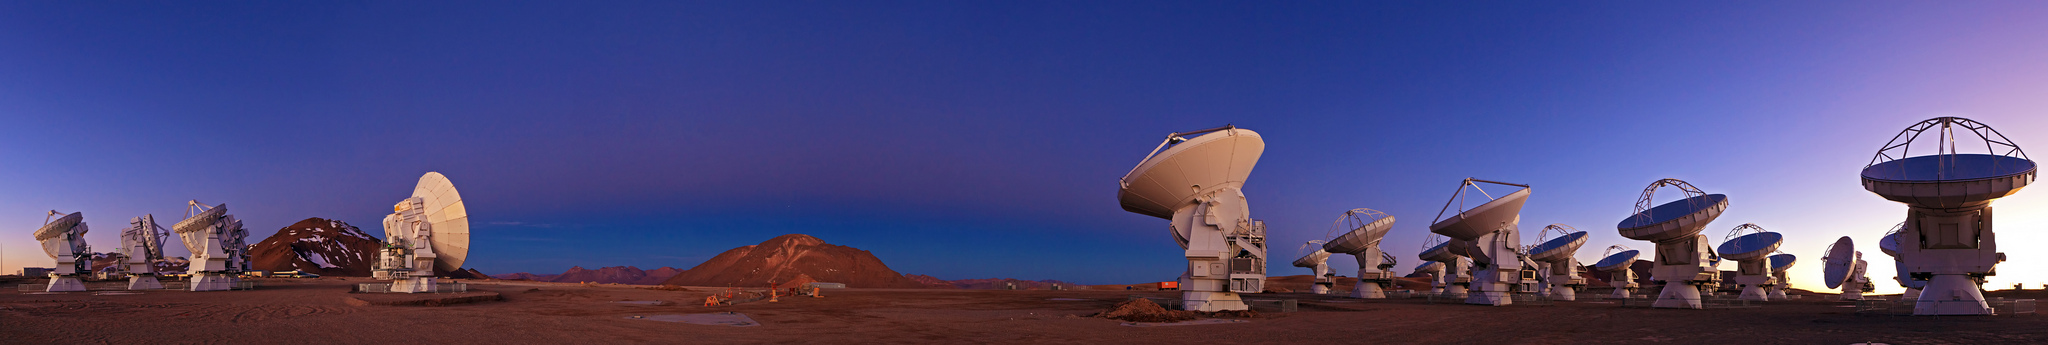 ALMA and Chajnantor at Twilight, by ESO (CC BY 2.0)